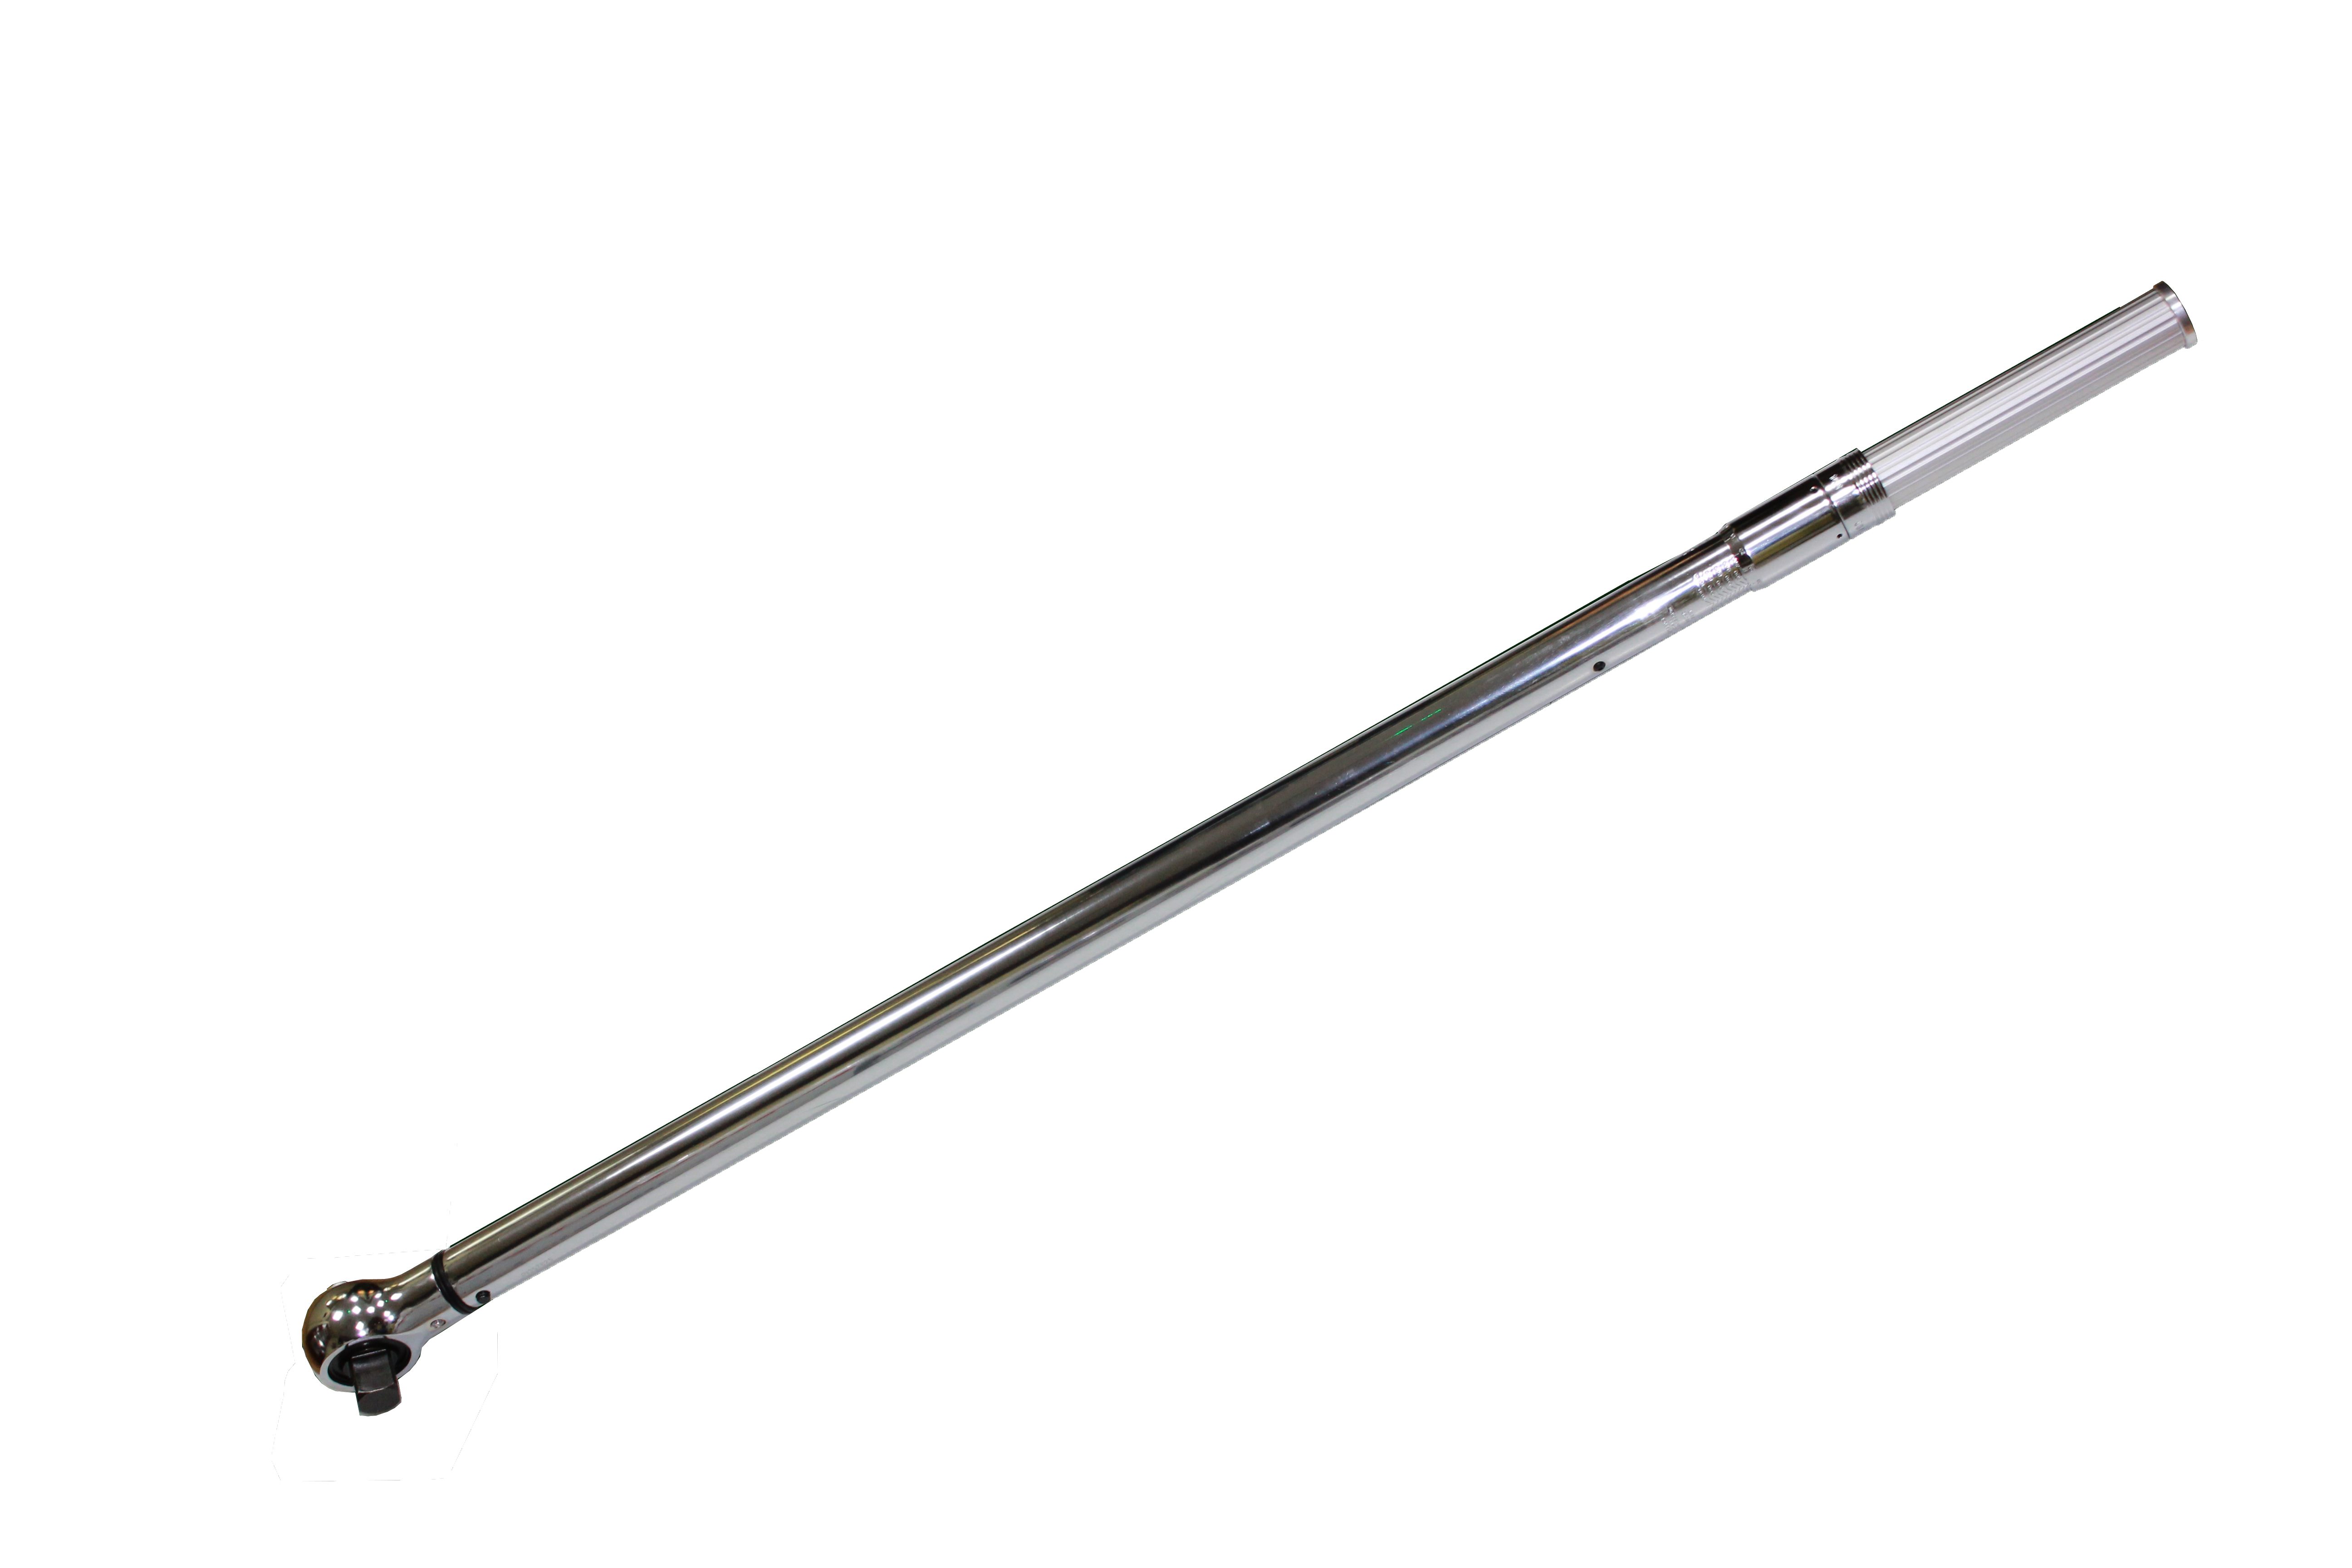 Torque Wrench - Large Capacities